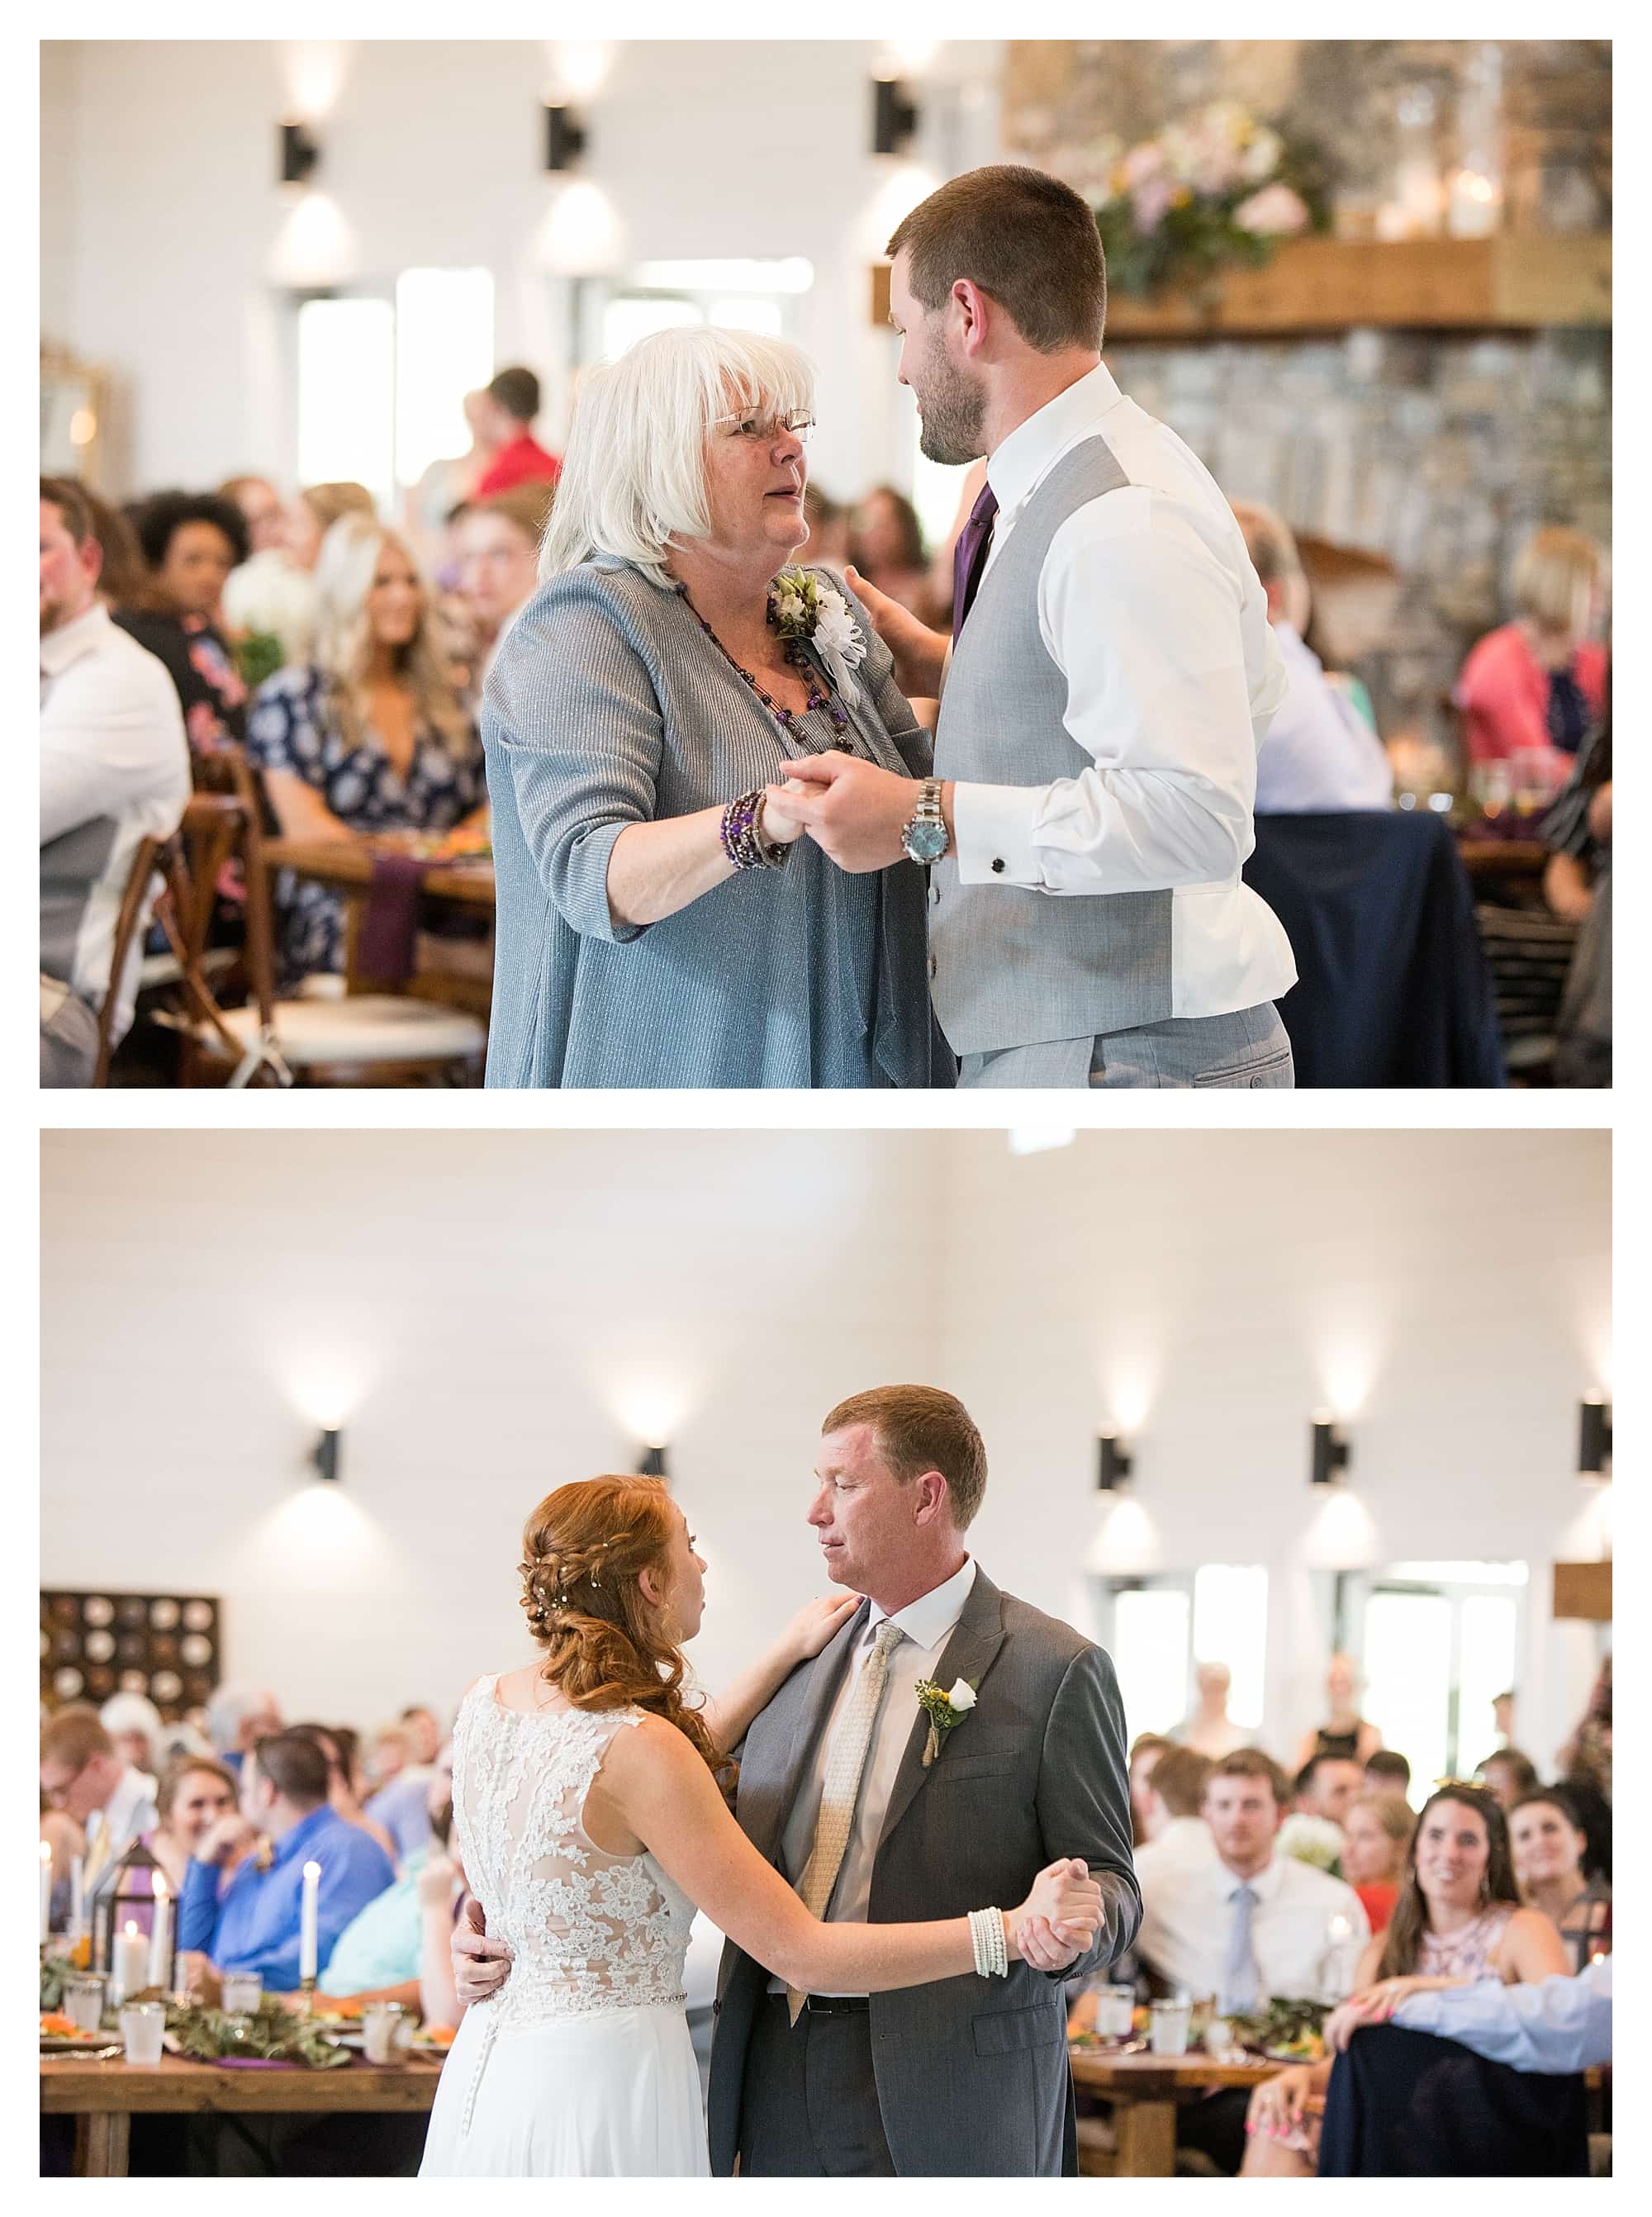 First dances at wedding with parents